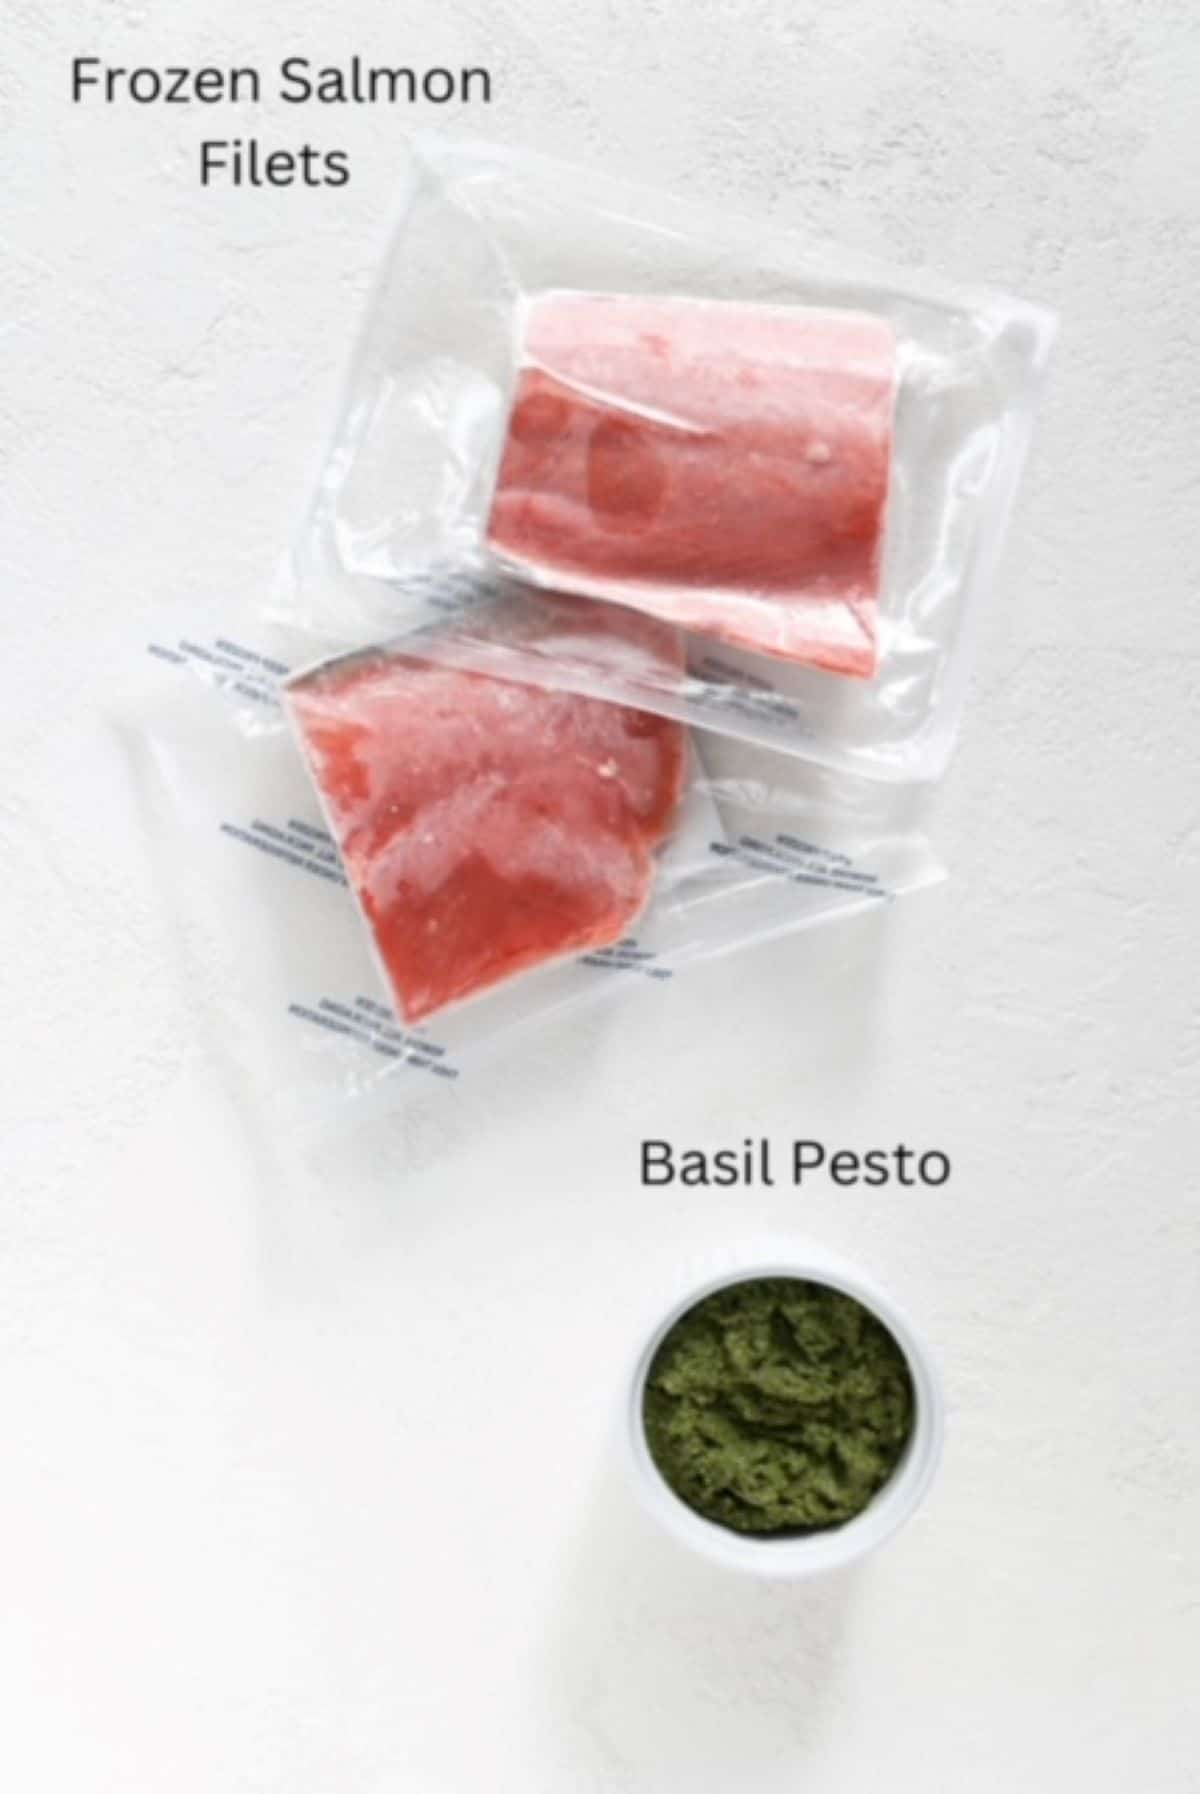 Two pieces of frozen salmon vacuum sealed and pesto in a white serving dish, labeled.